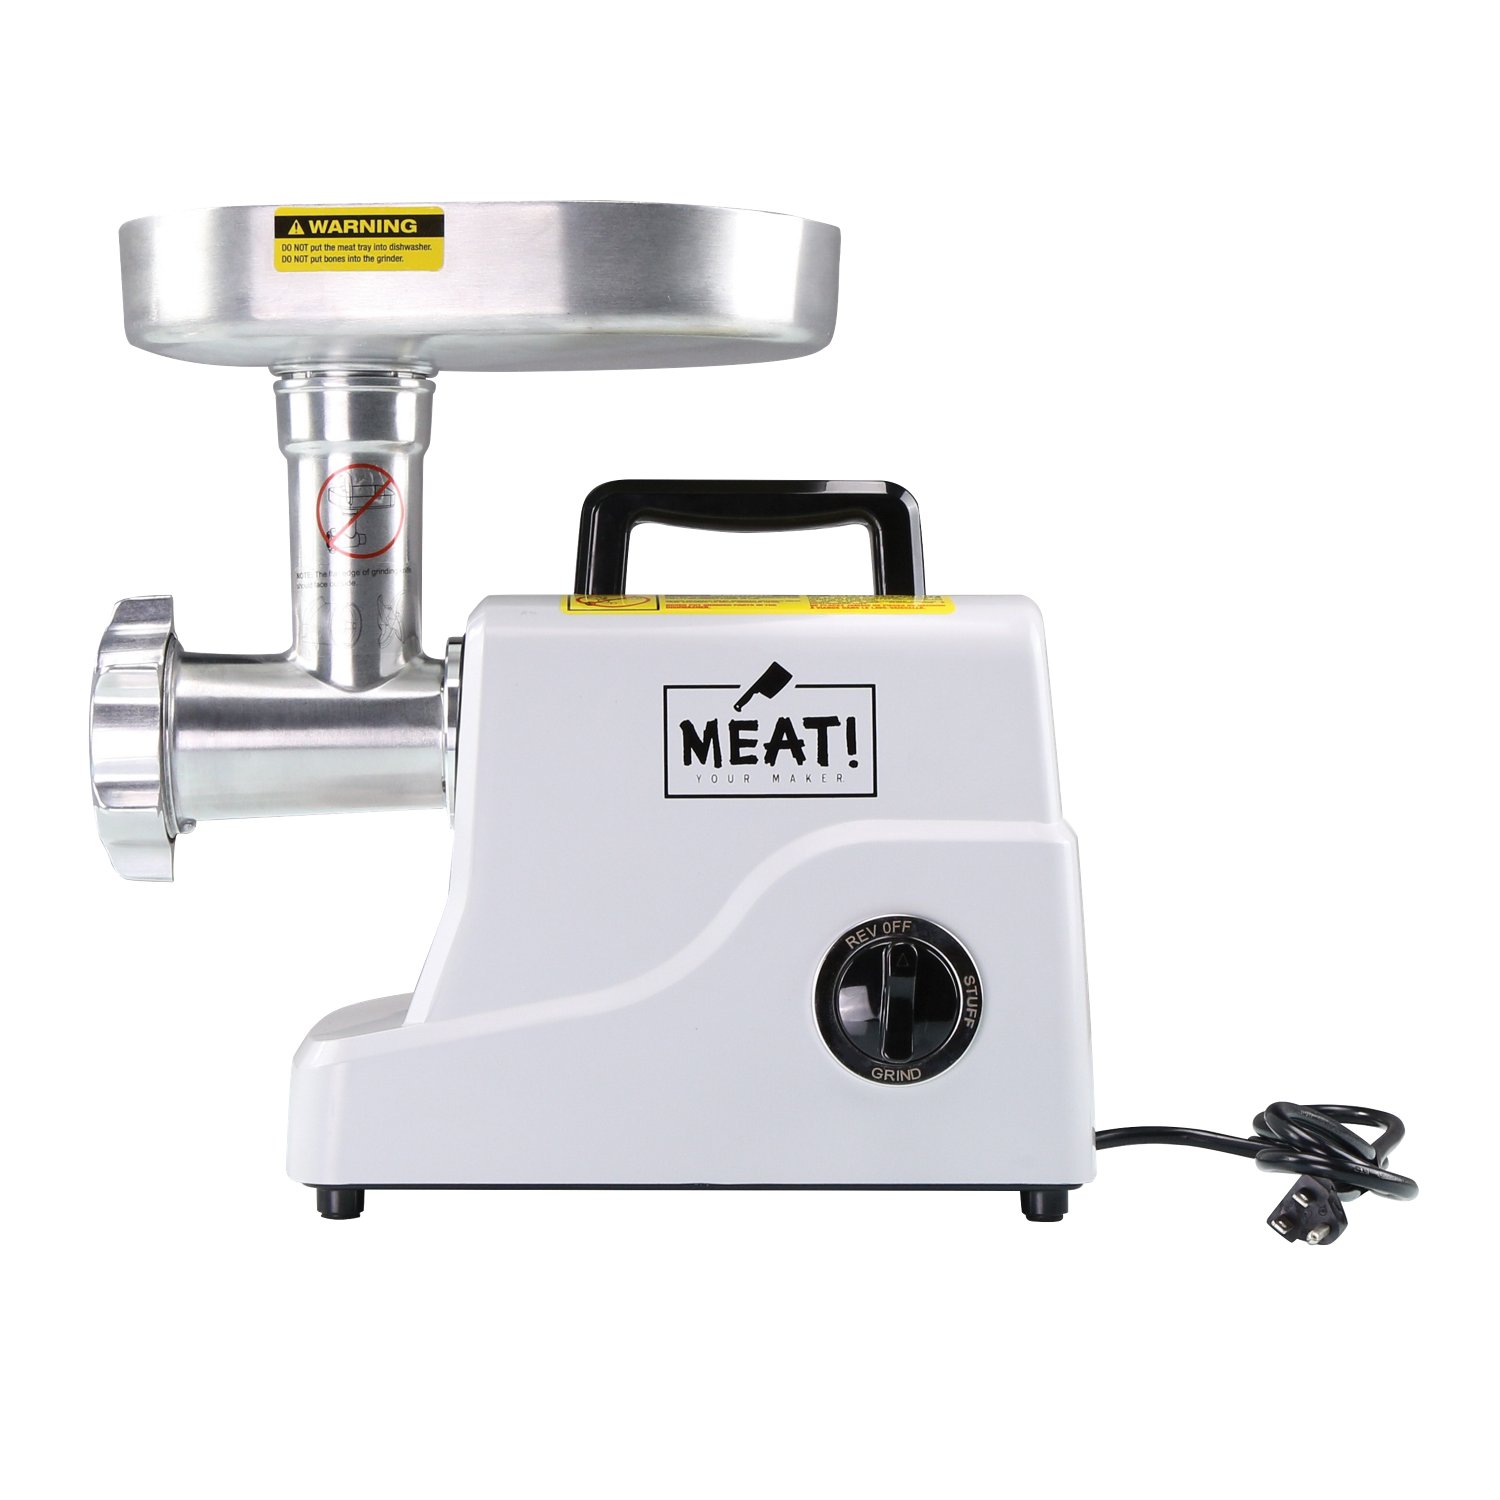 Meat 500 Watt #12 Grinder - Food Processing at Academy Sports